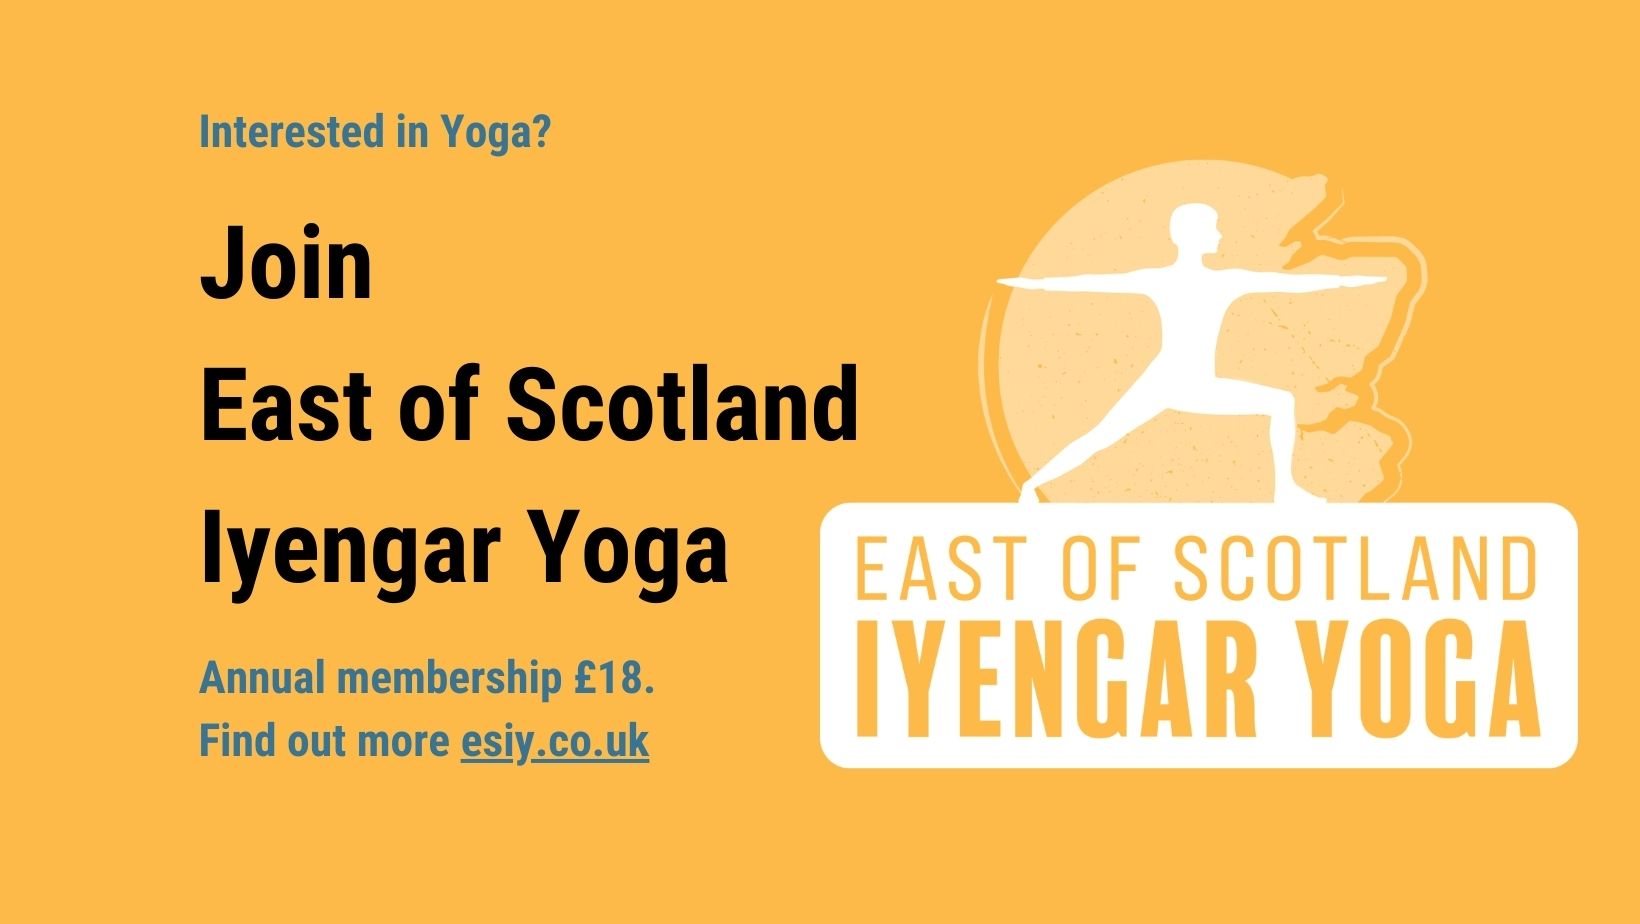 East of Scotland Iyengar Yoga exists to connect and support students of Iyengar Yoga across the East of Scotland.